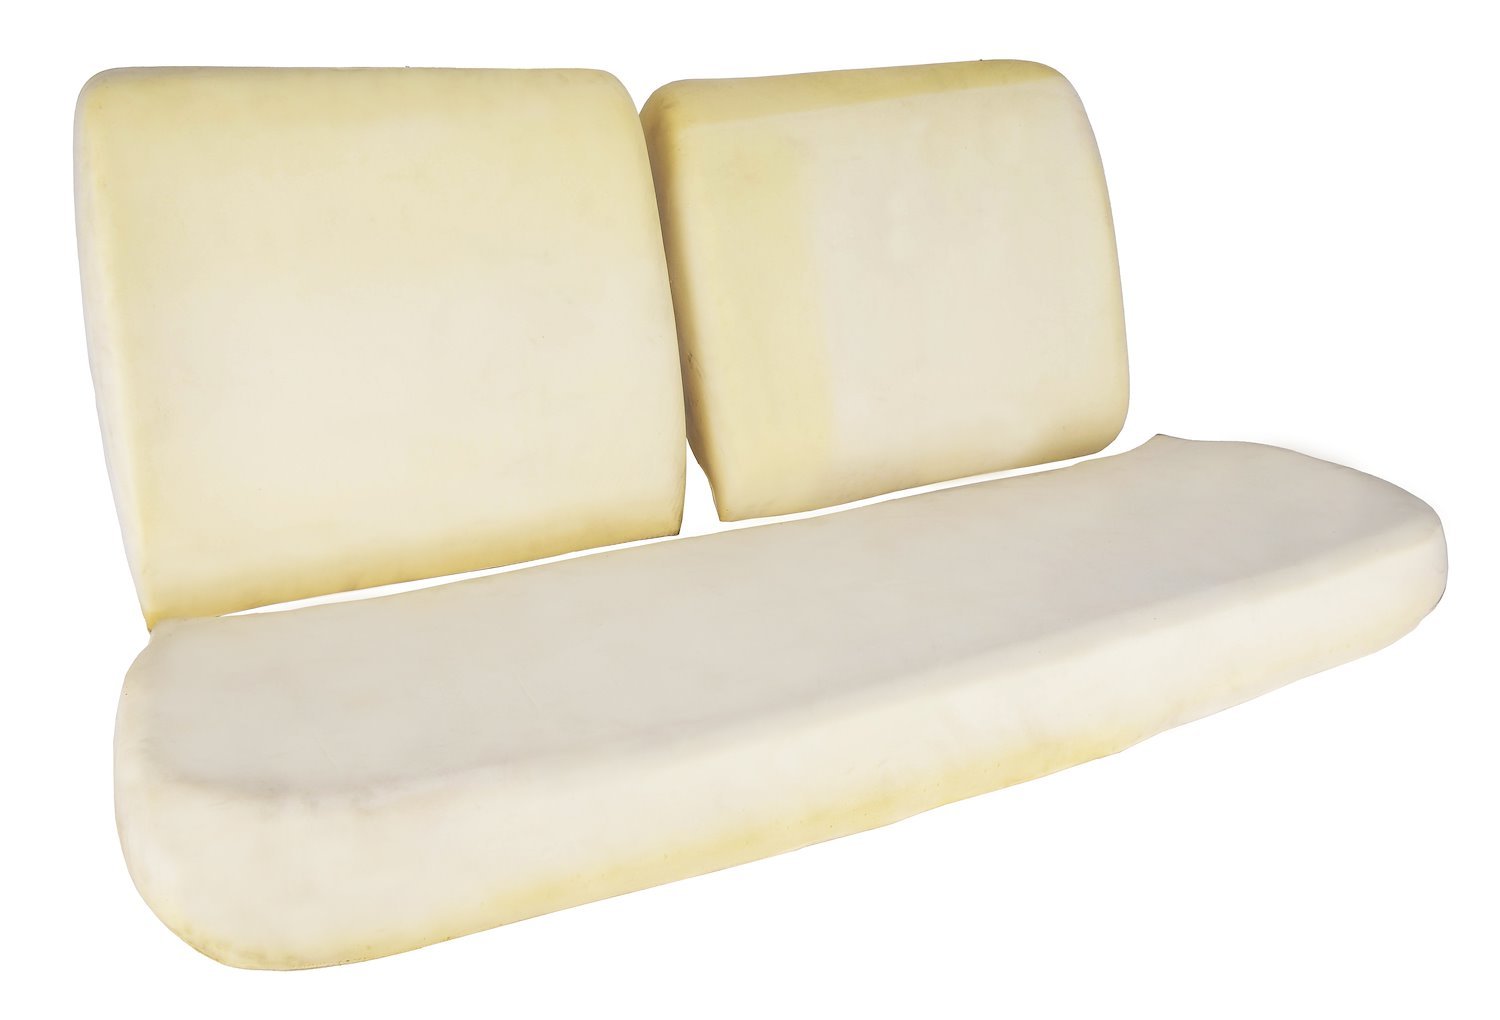 Bench Seat Foam Fits Select 1968-1972 Buick, Chevrolet, Oldsmobile, Pontiac Models w/Spring Style Seat Back